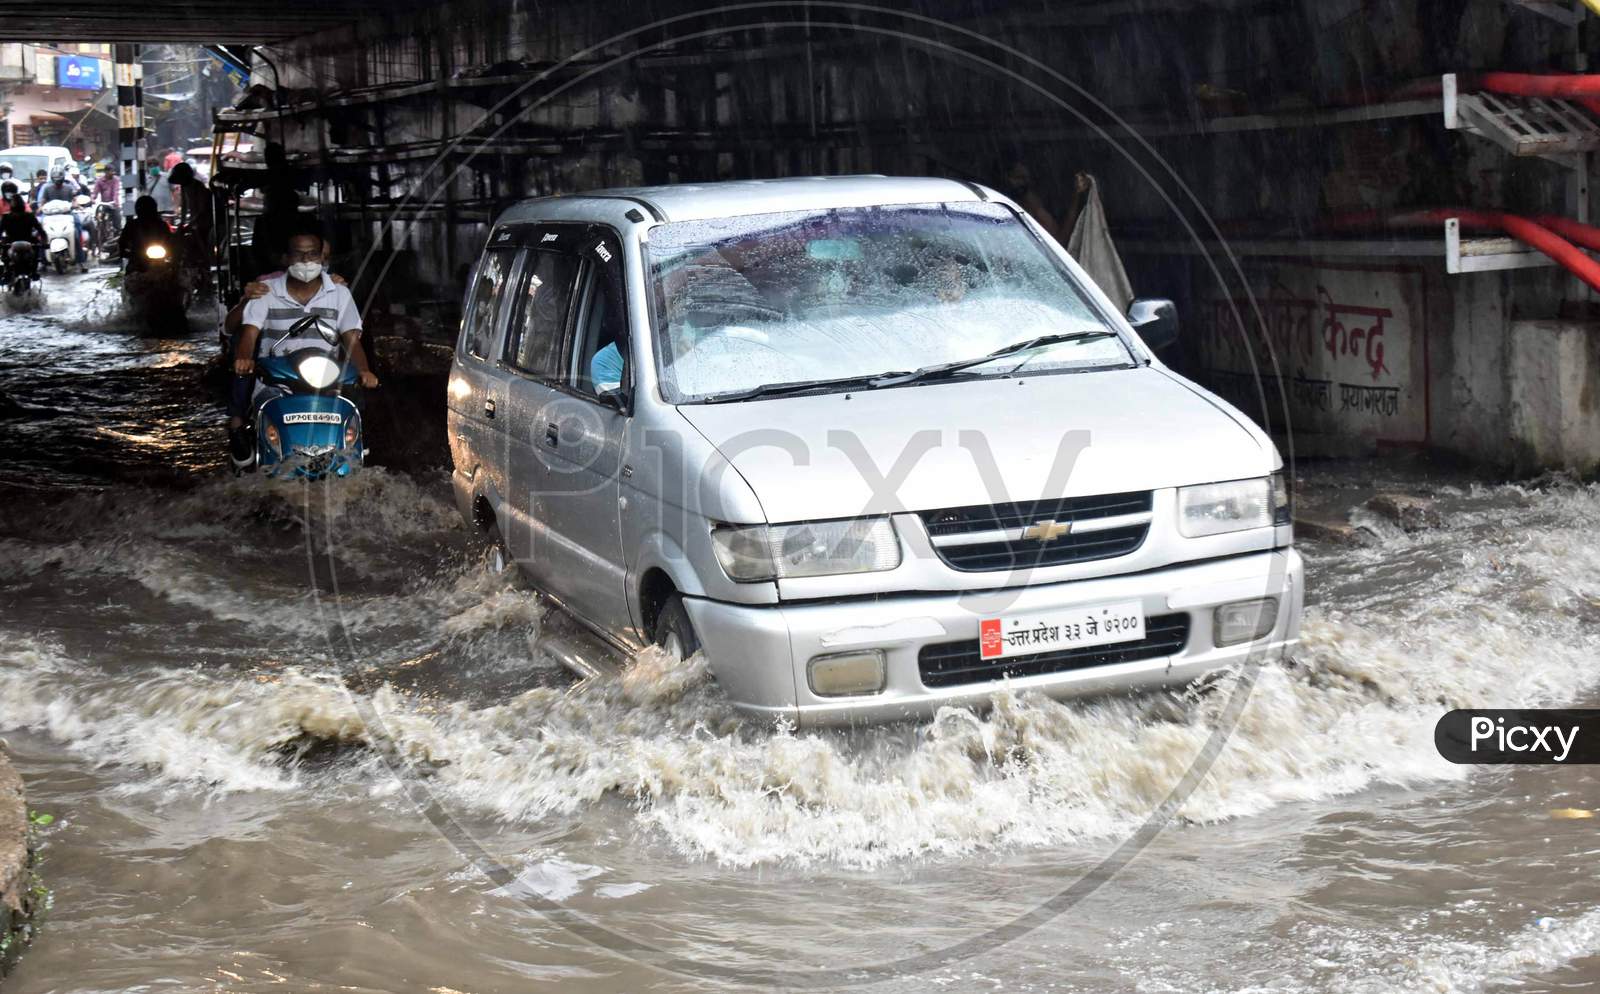 People drive on the road during heavy rains in Prayagraj, August 12, 2020.